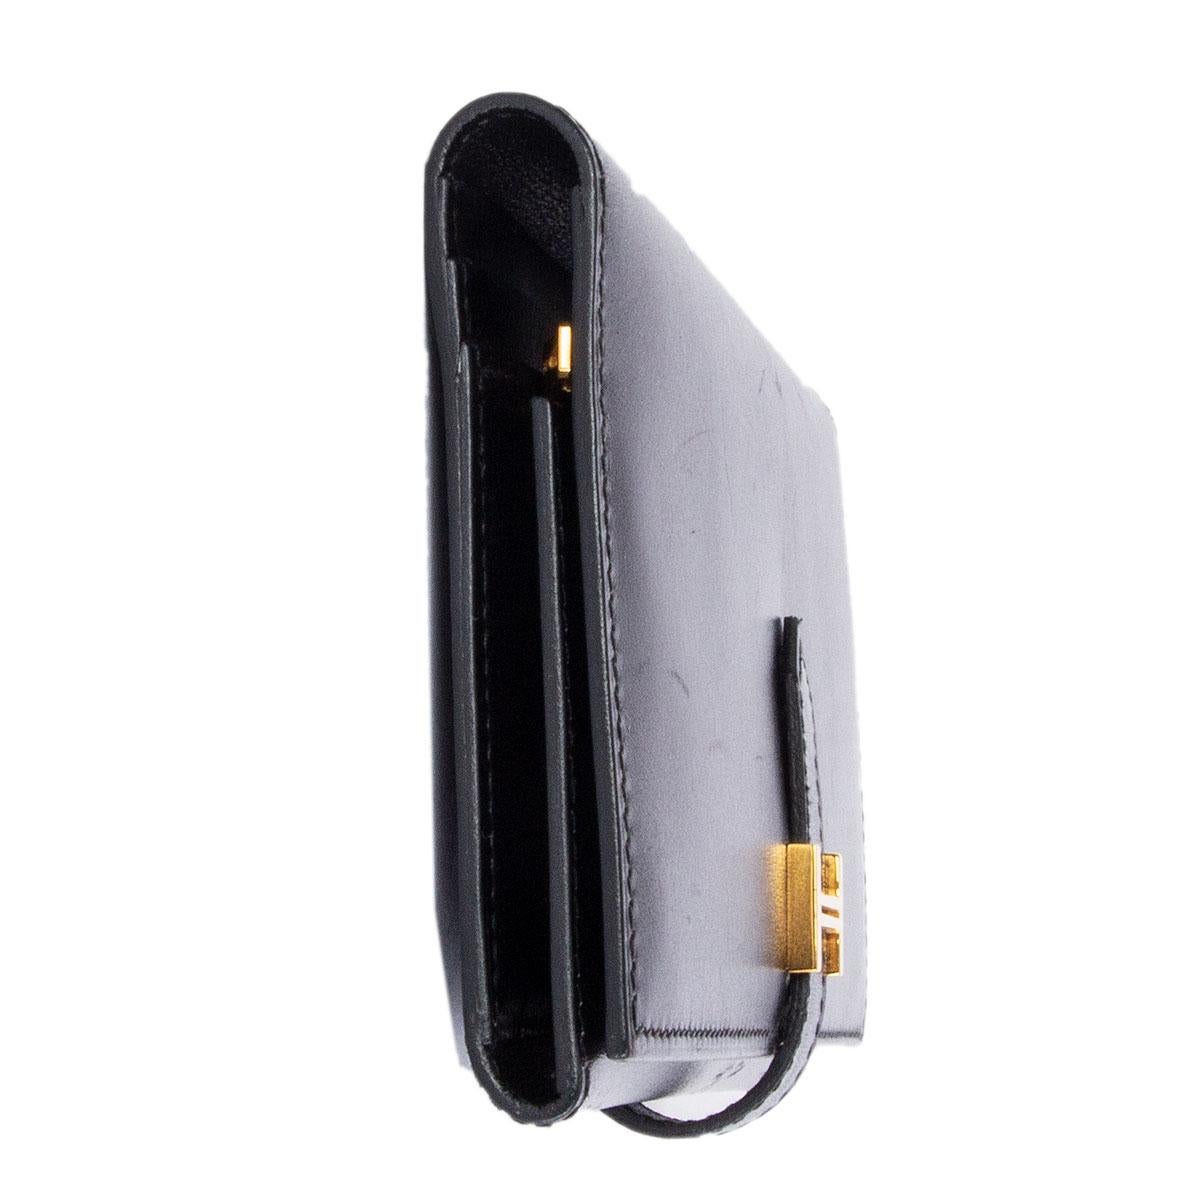 100% authentic Hermes Bearn wallet in black Veau Box leather featuring gold-tone hardware. Opens with a 'H' buckle. Has a zip coin pocket and 10 credit card slots plus 5 flat compartments. Has been carried and is in excellent condition.